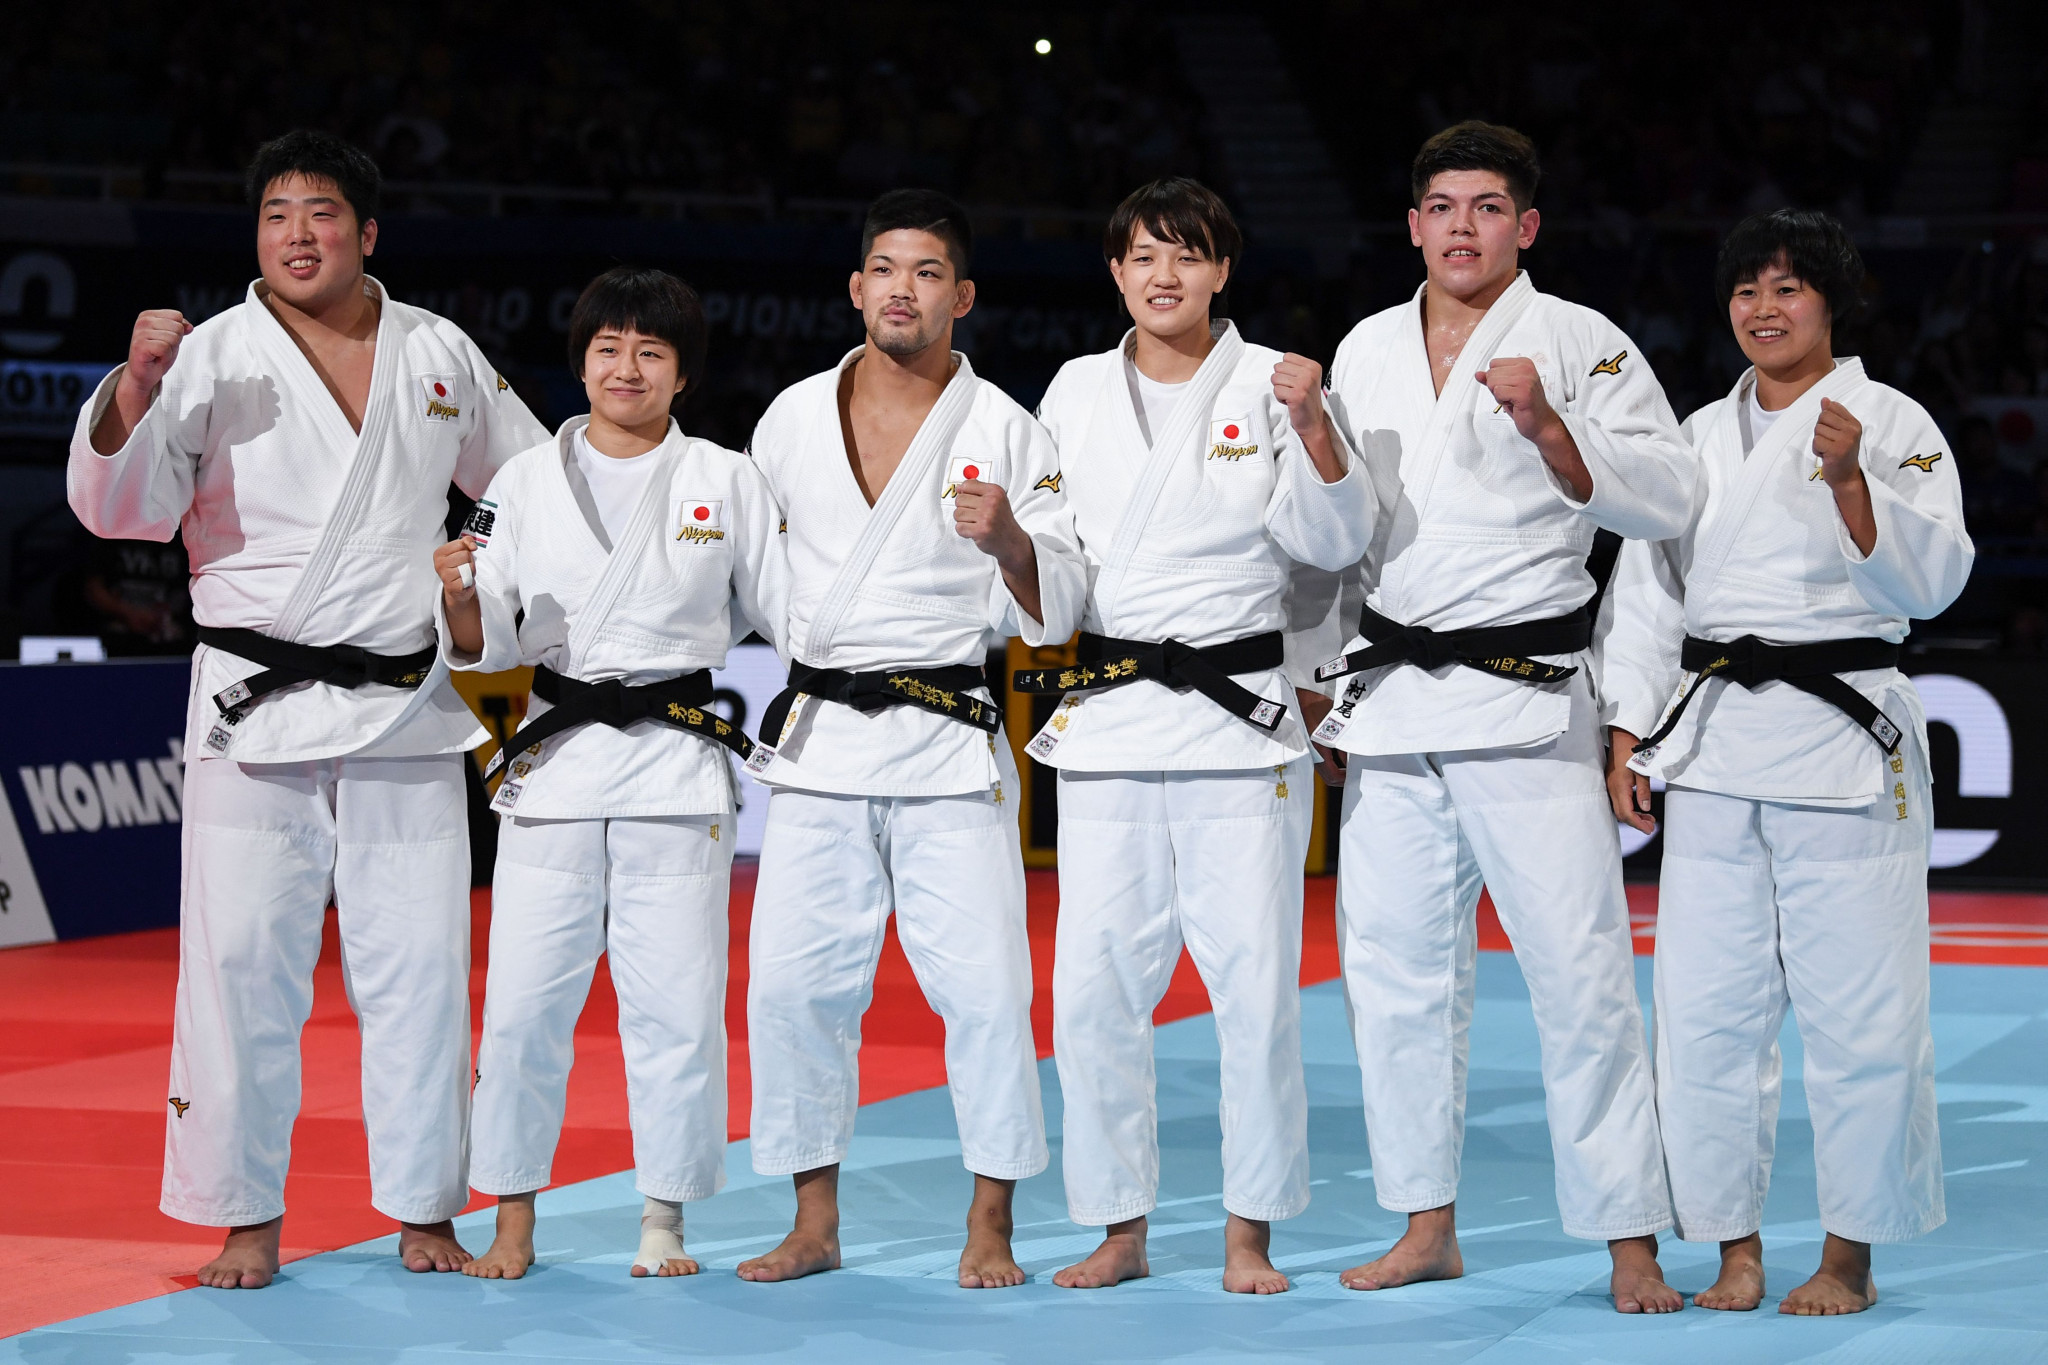 Japan win hat-trick of IJF World Championship mixed team golds by beating France in Tokyo